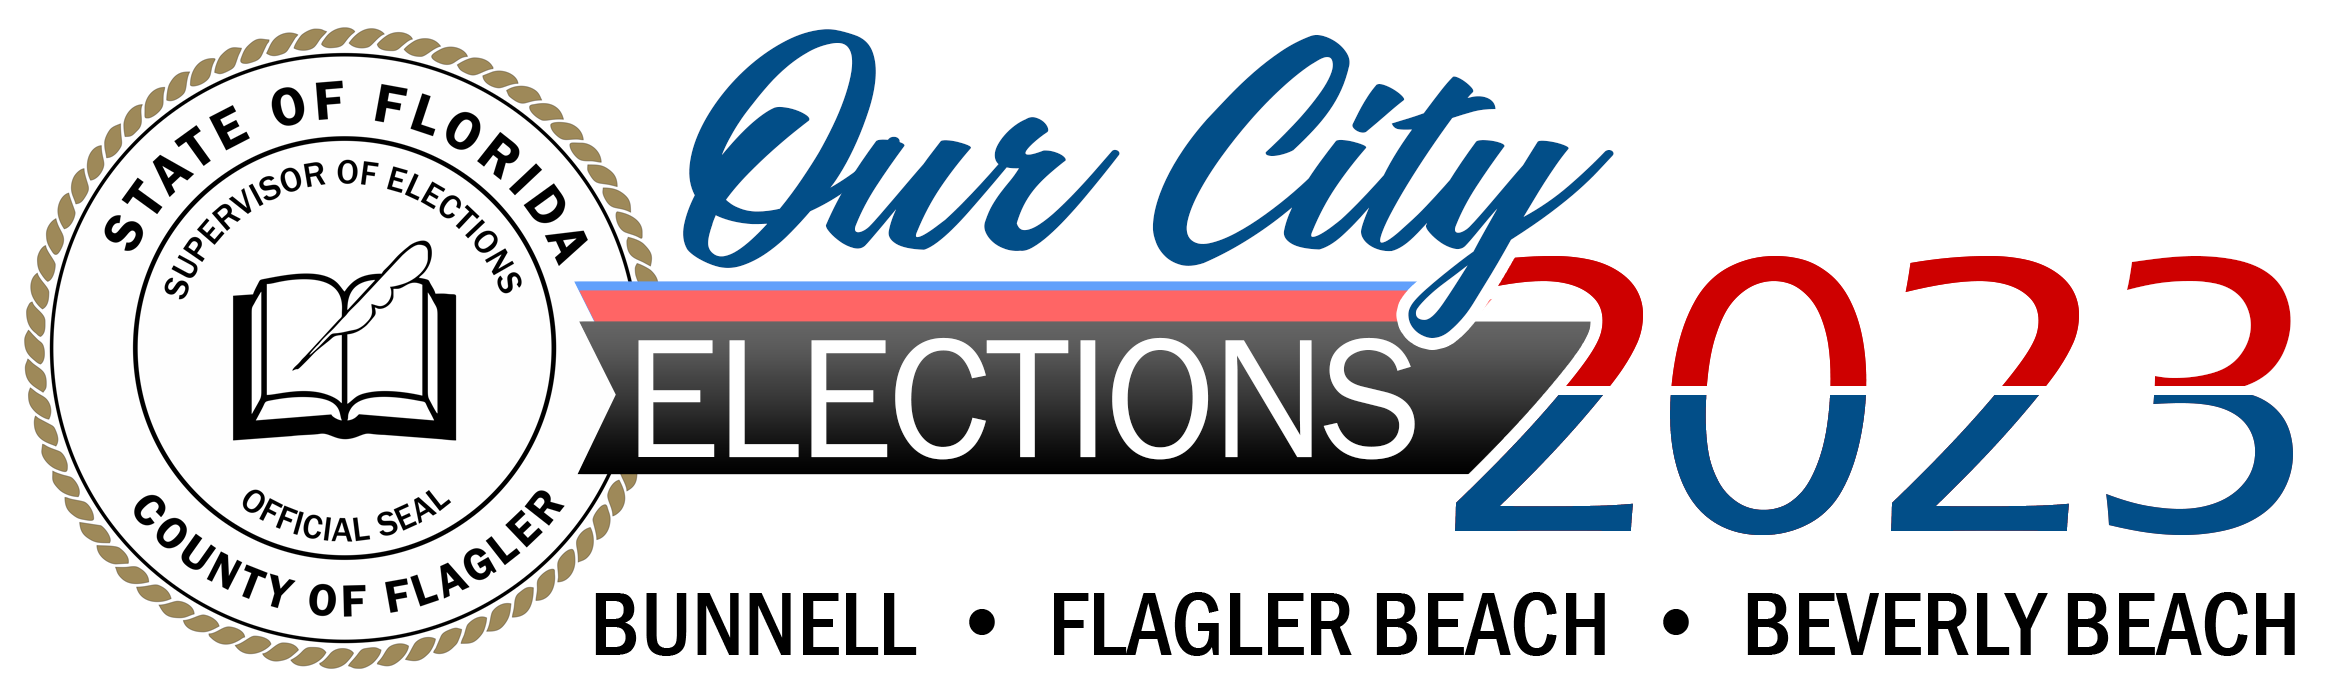 Our City Elections